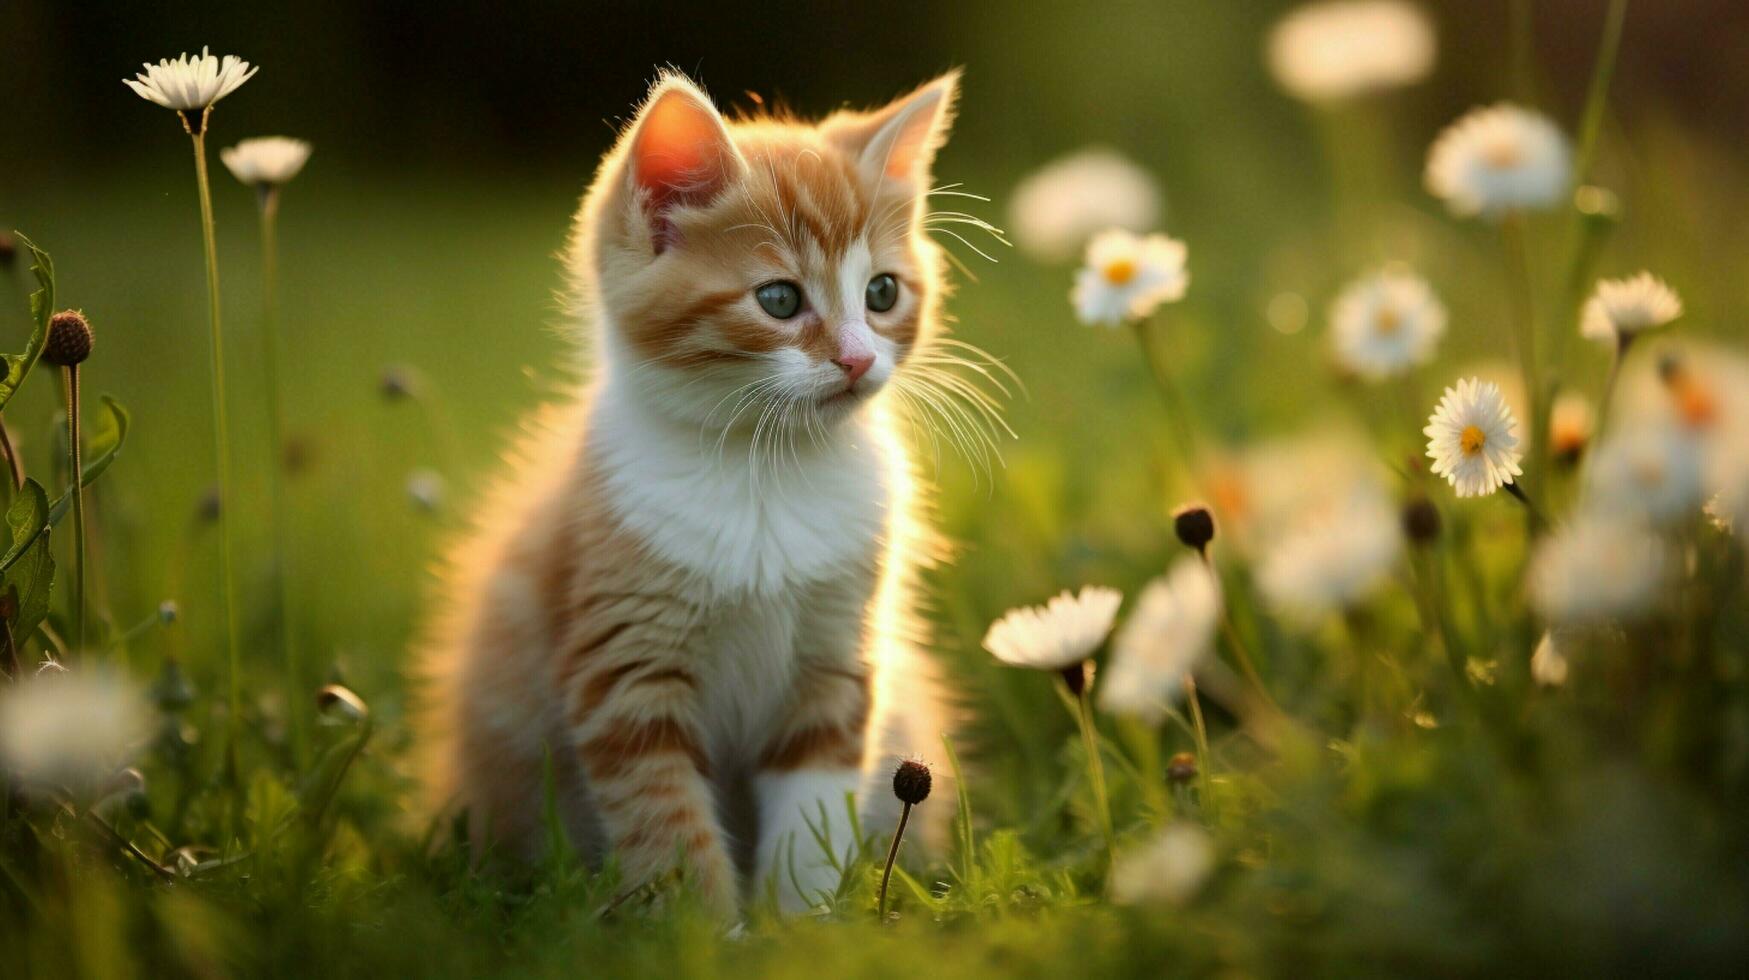 a cute kitten sitting in the grass looking at a flower photo